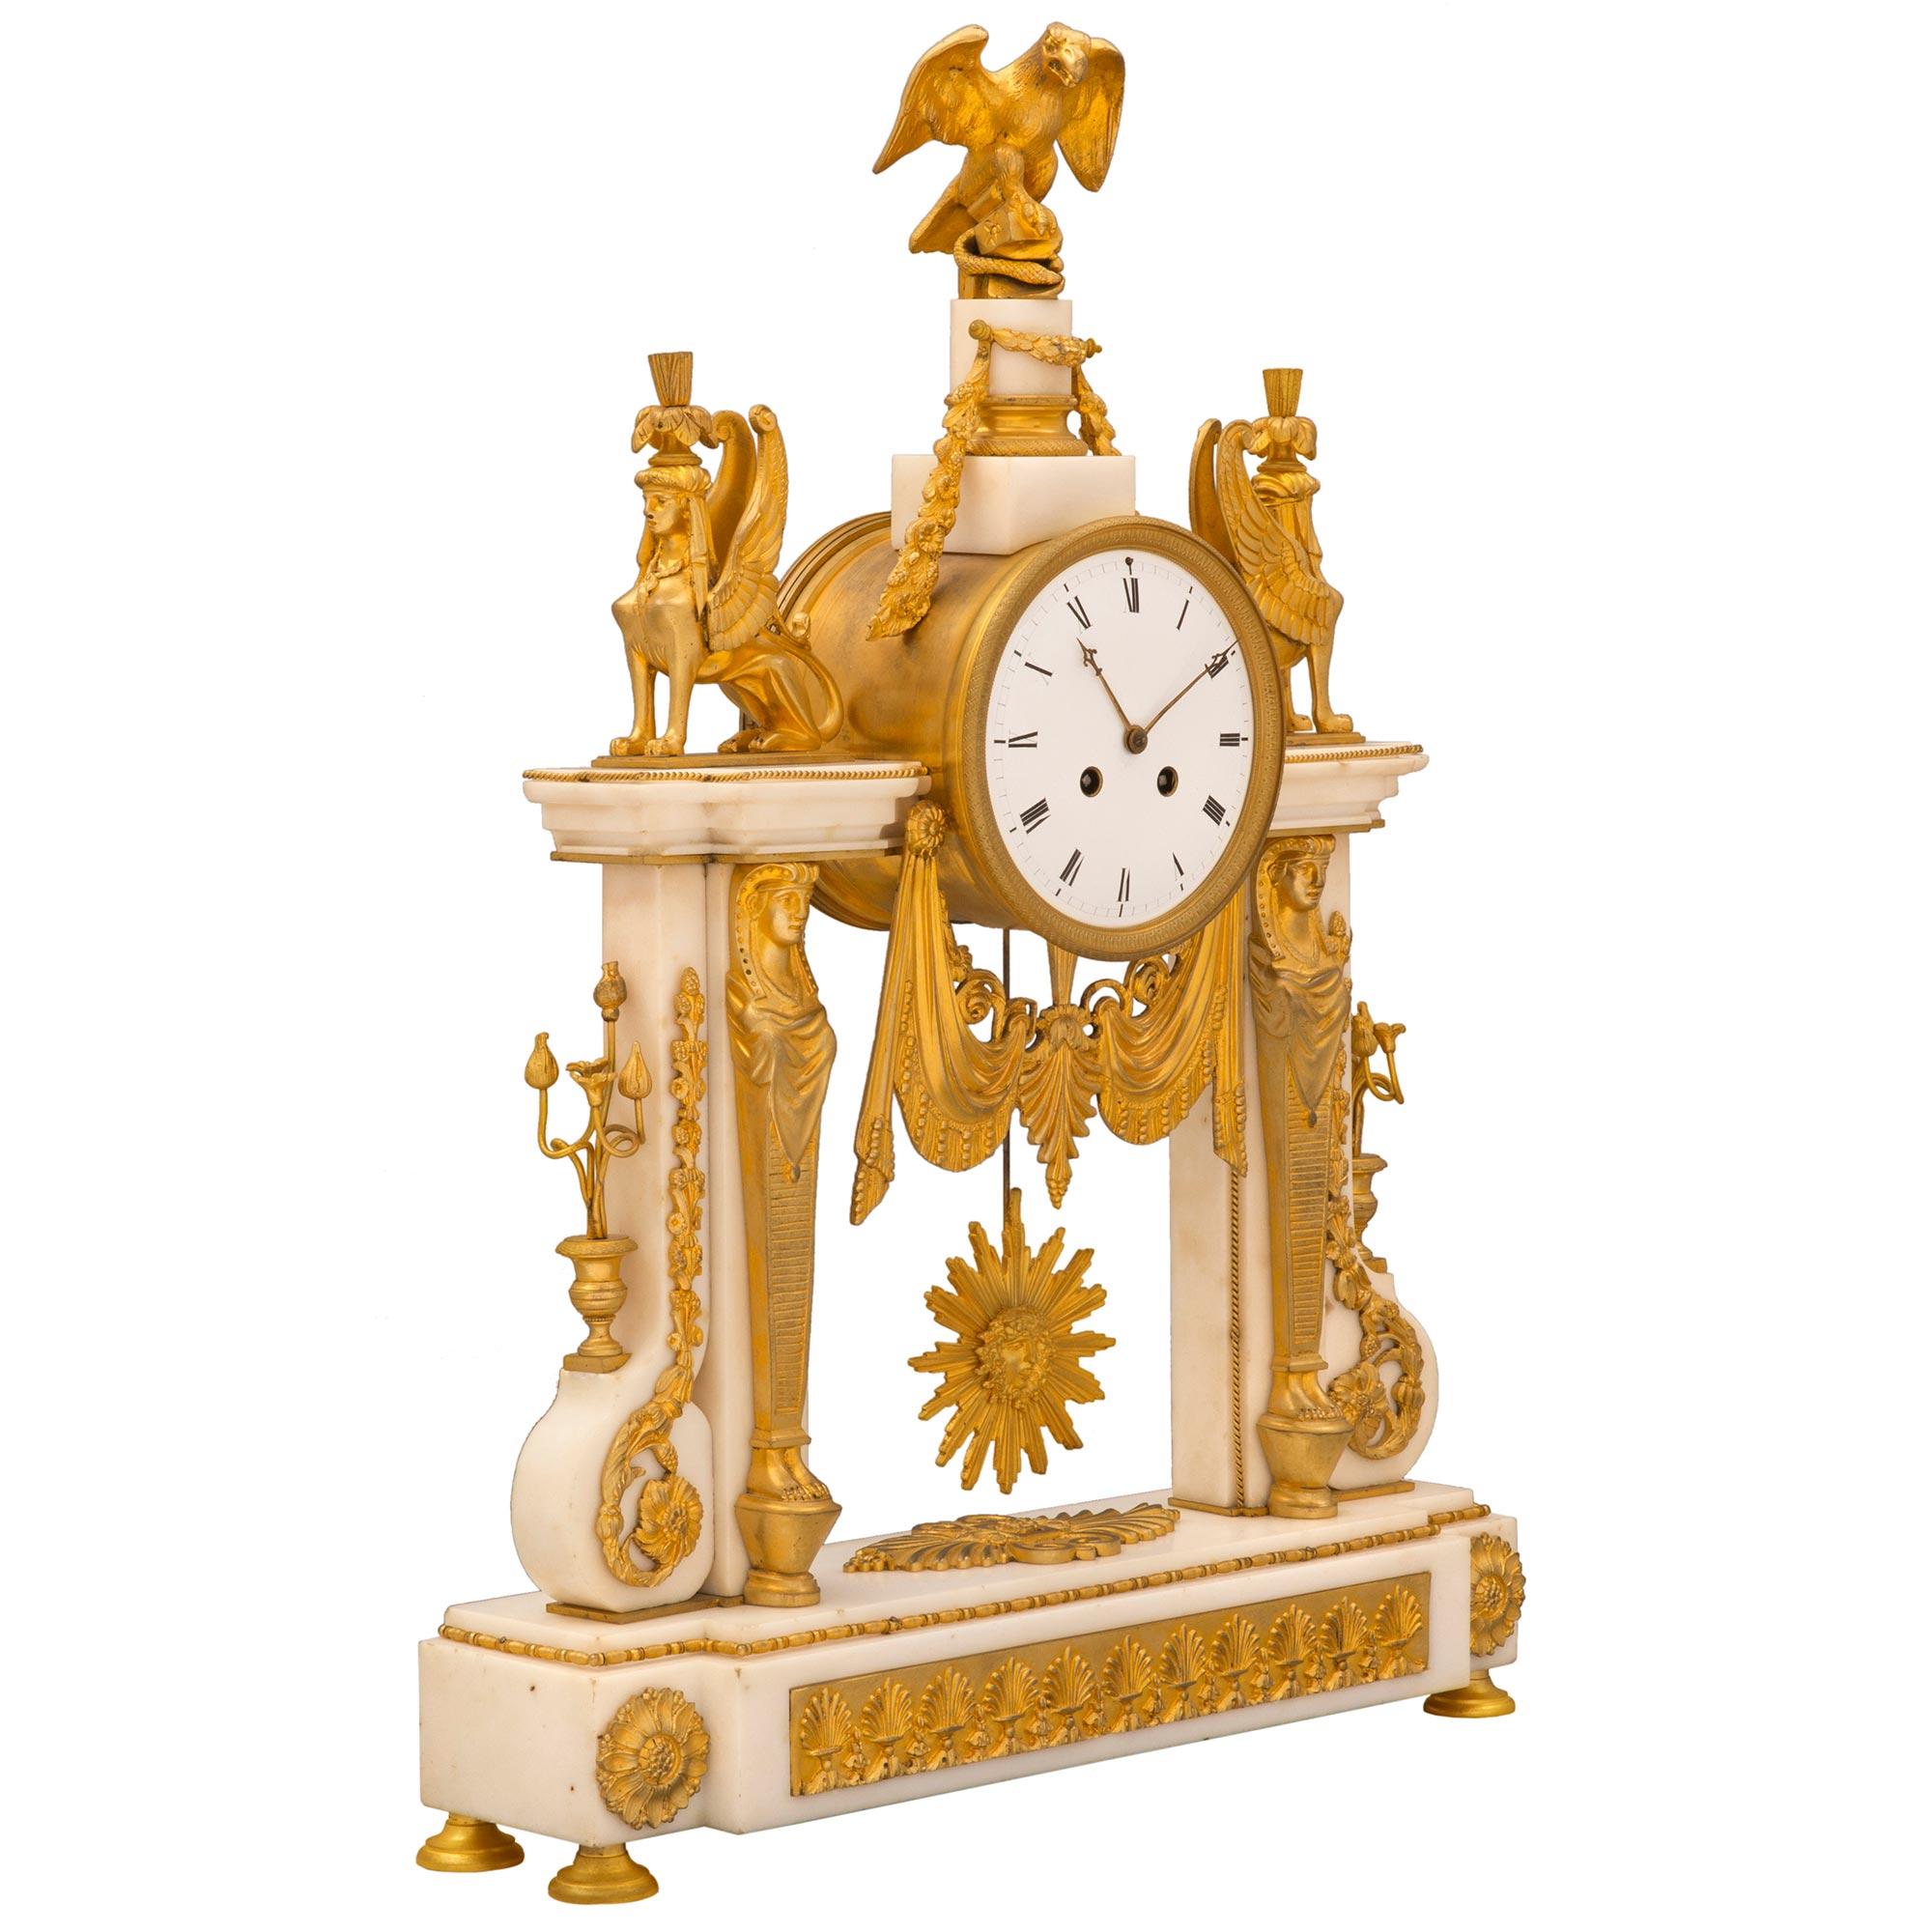 A stunning and high quality French 19th century Neo-Classical st. ormolu and white Carrara marble clock. The clock is raised by fine circular mottled ormolu feet below the solid white Carrara marble base with striking richly chased sunflowers at